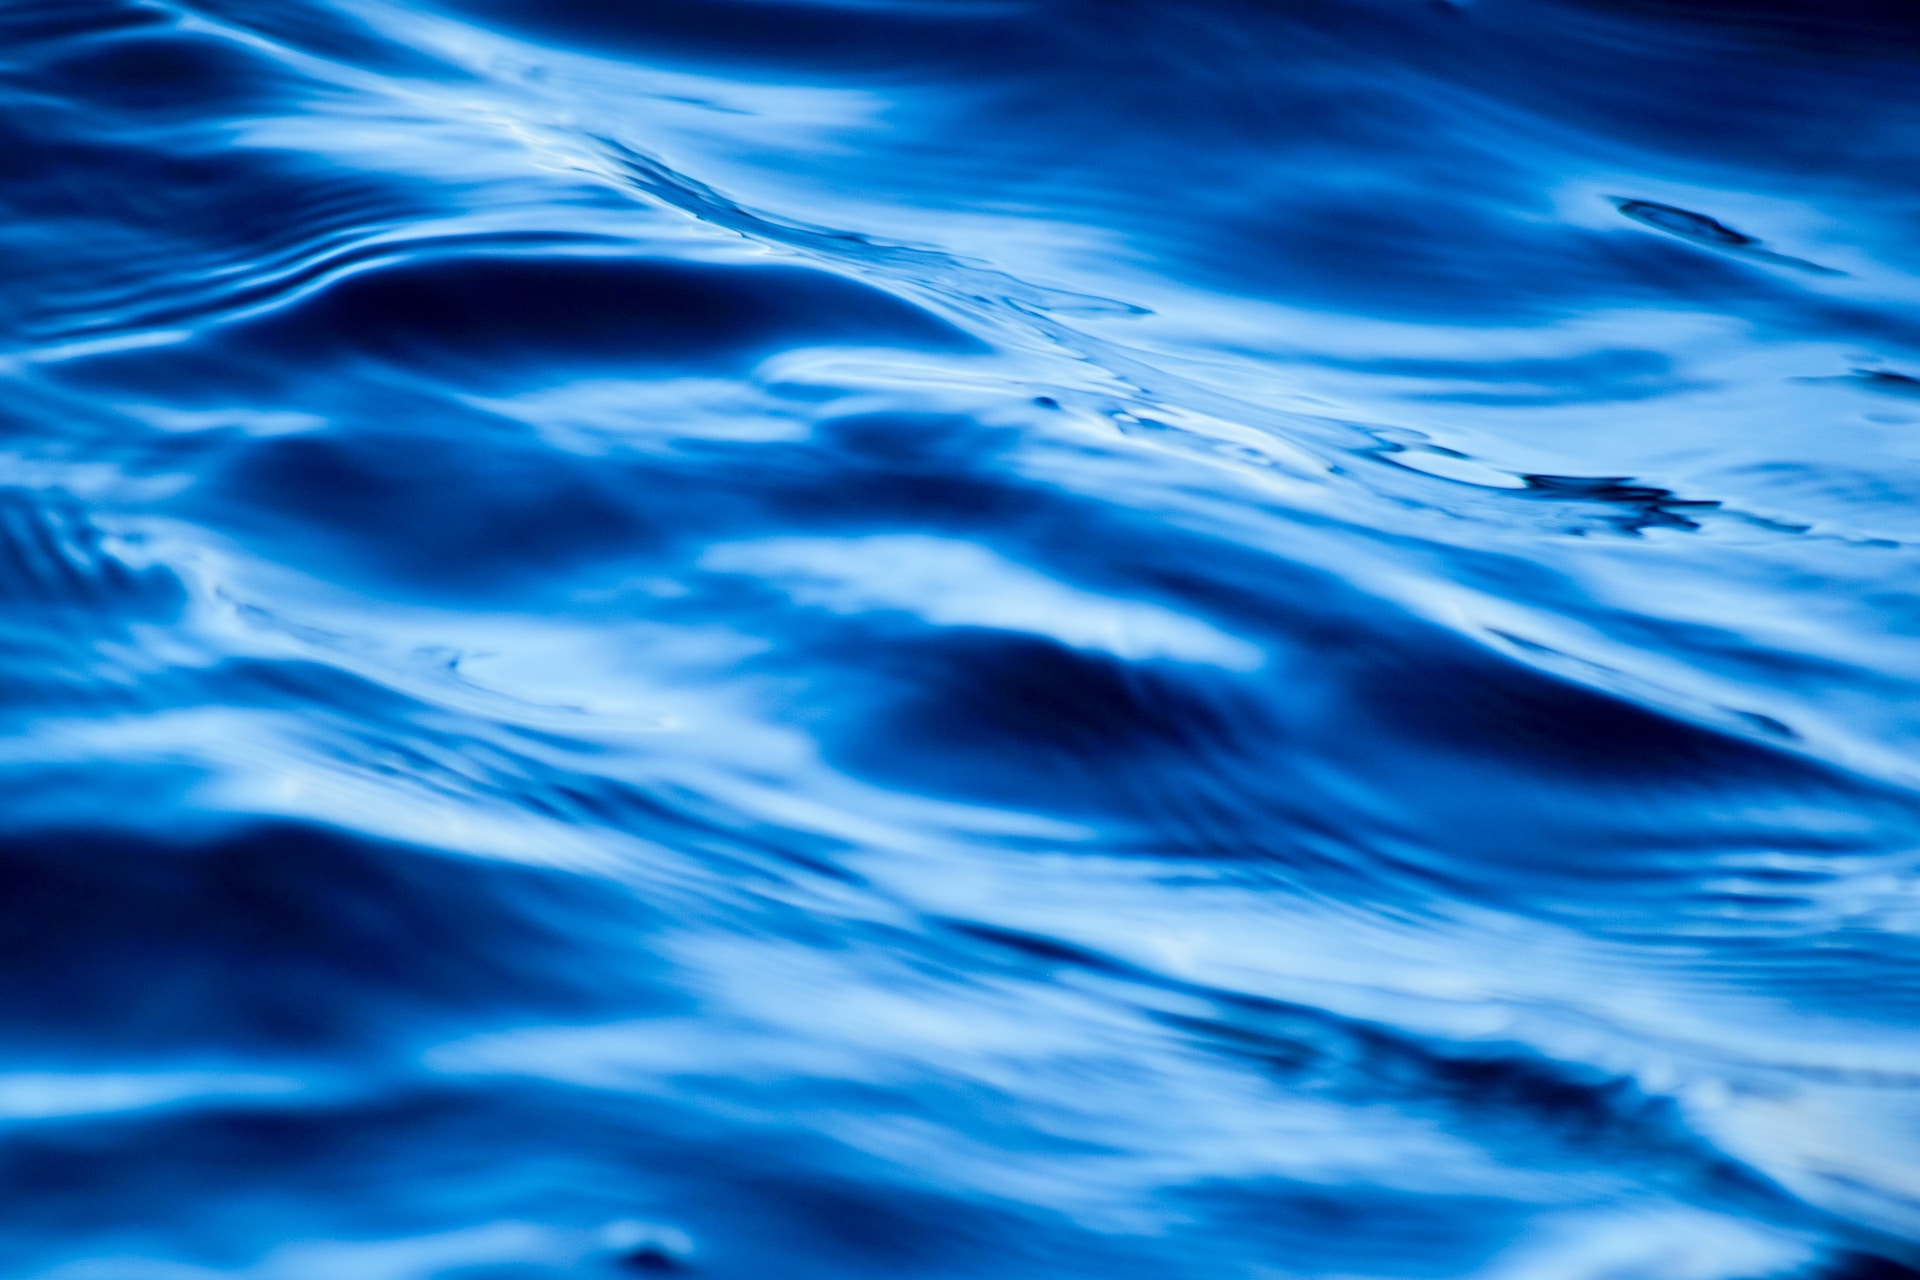 A close-up of ripples in bright blue water